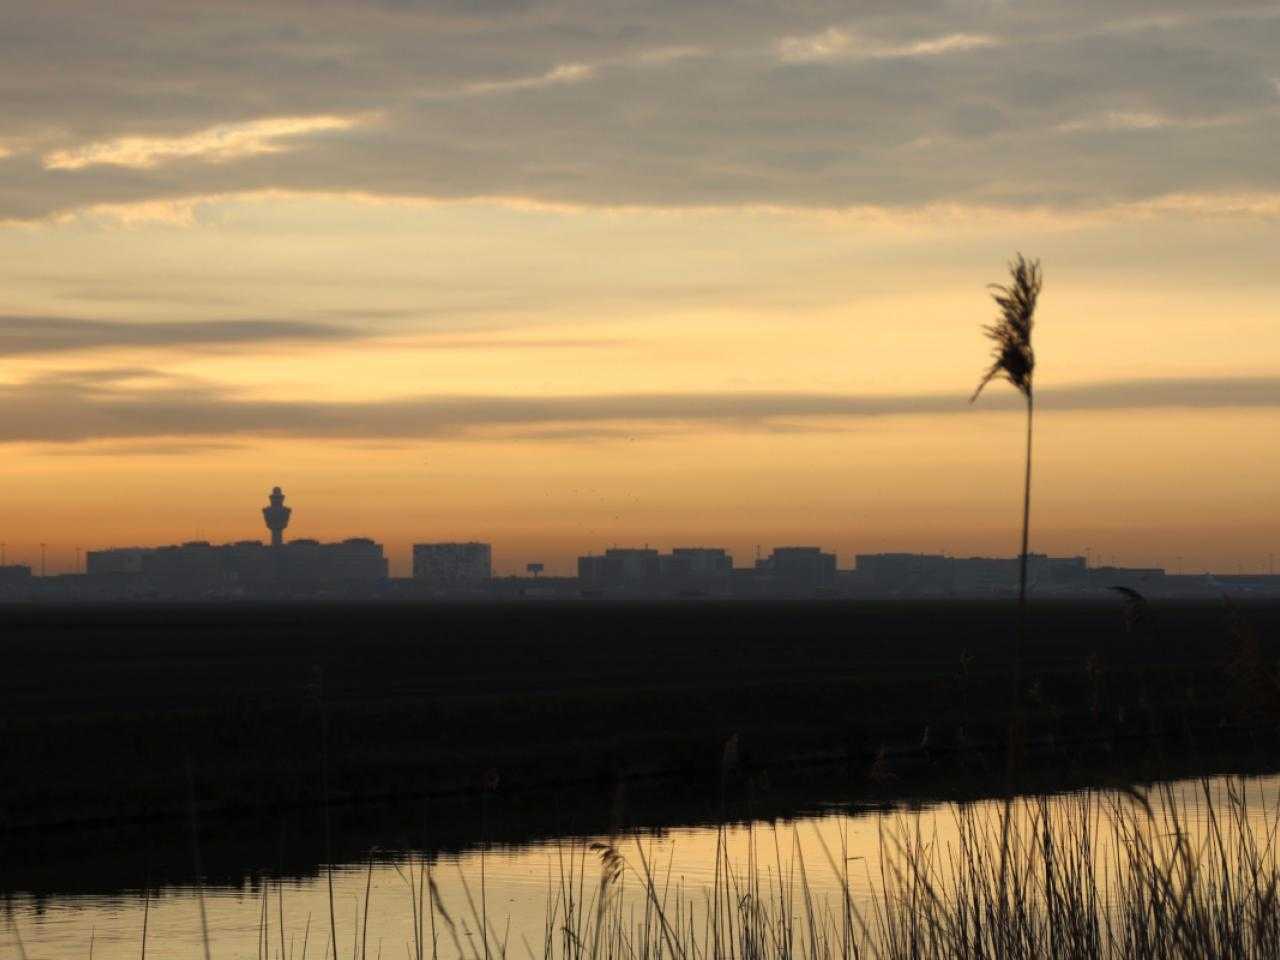 Schiphol during a sunset